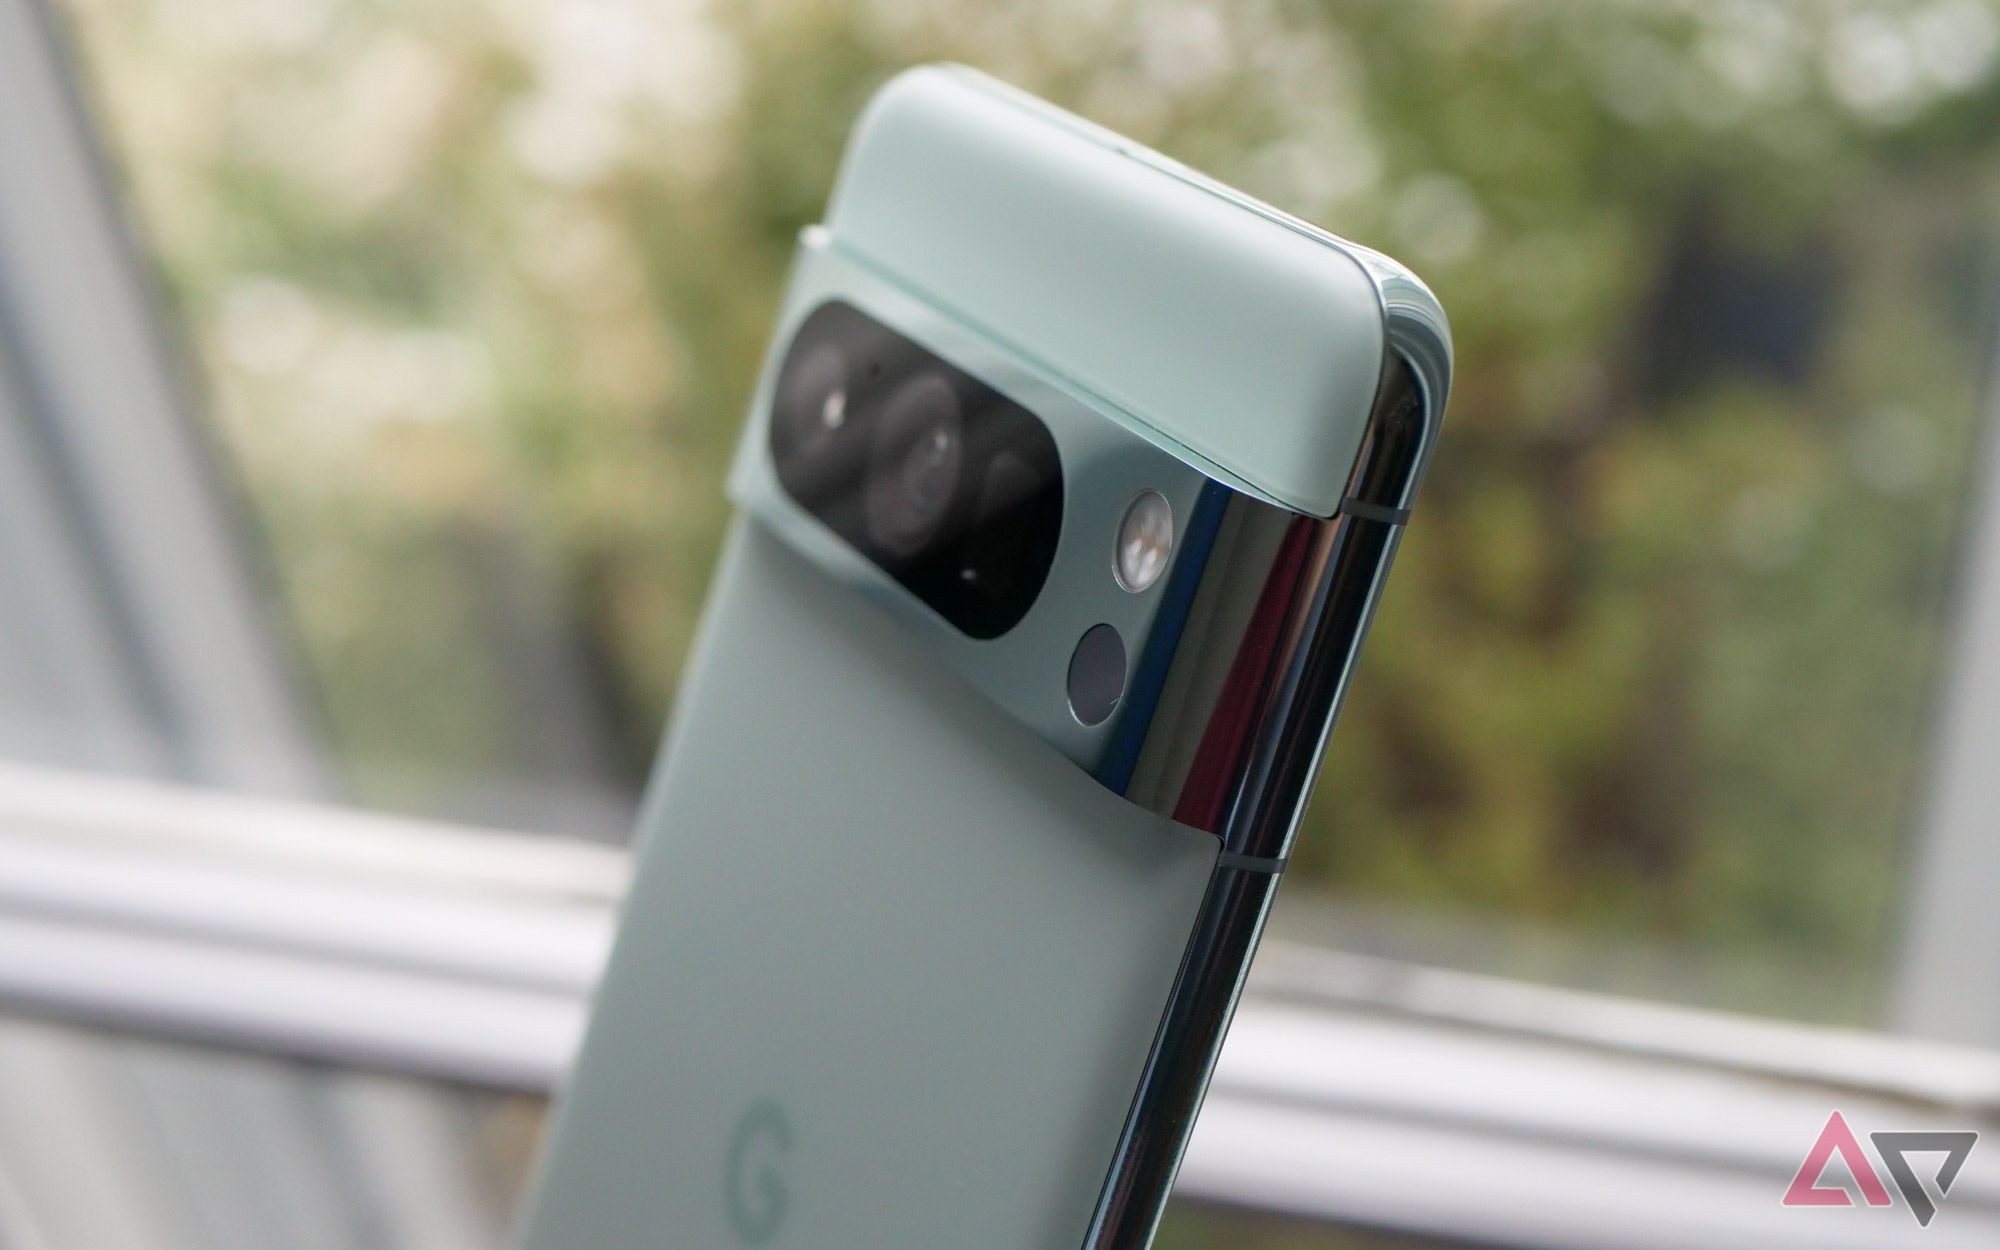 Photo Sphere returns to Google Pixel lineup, but here’s the catch